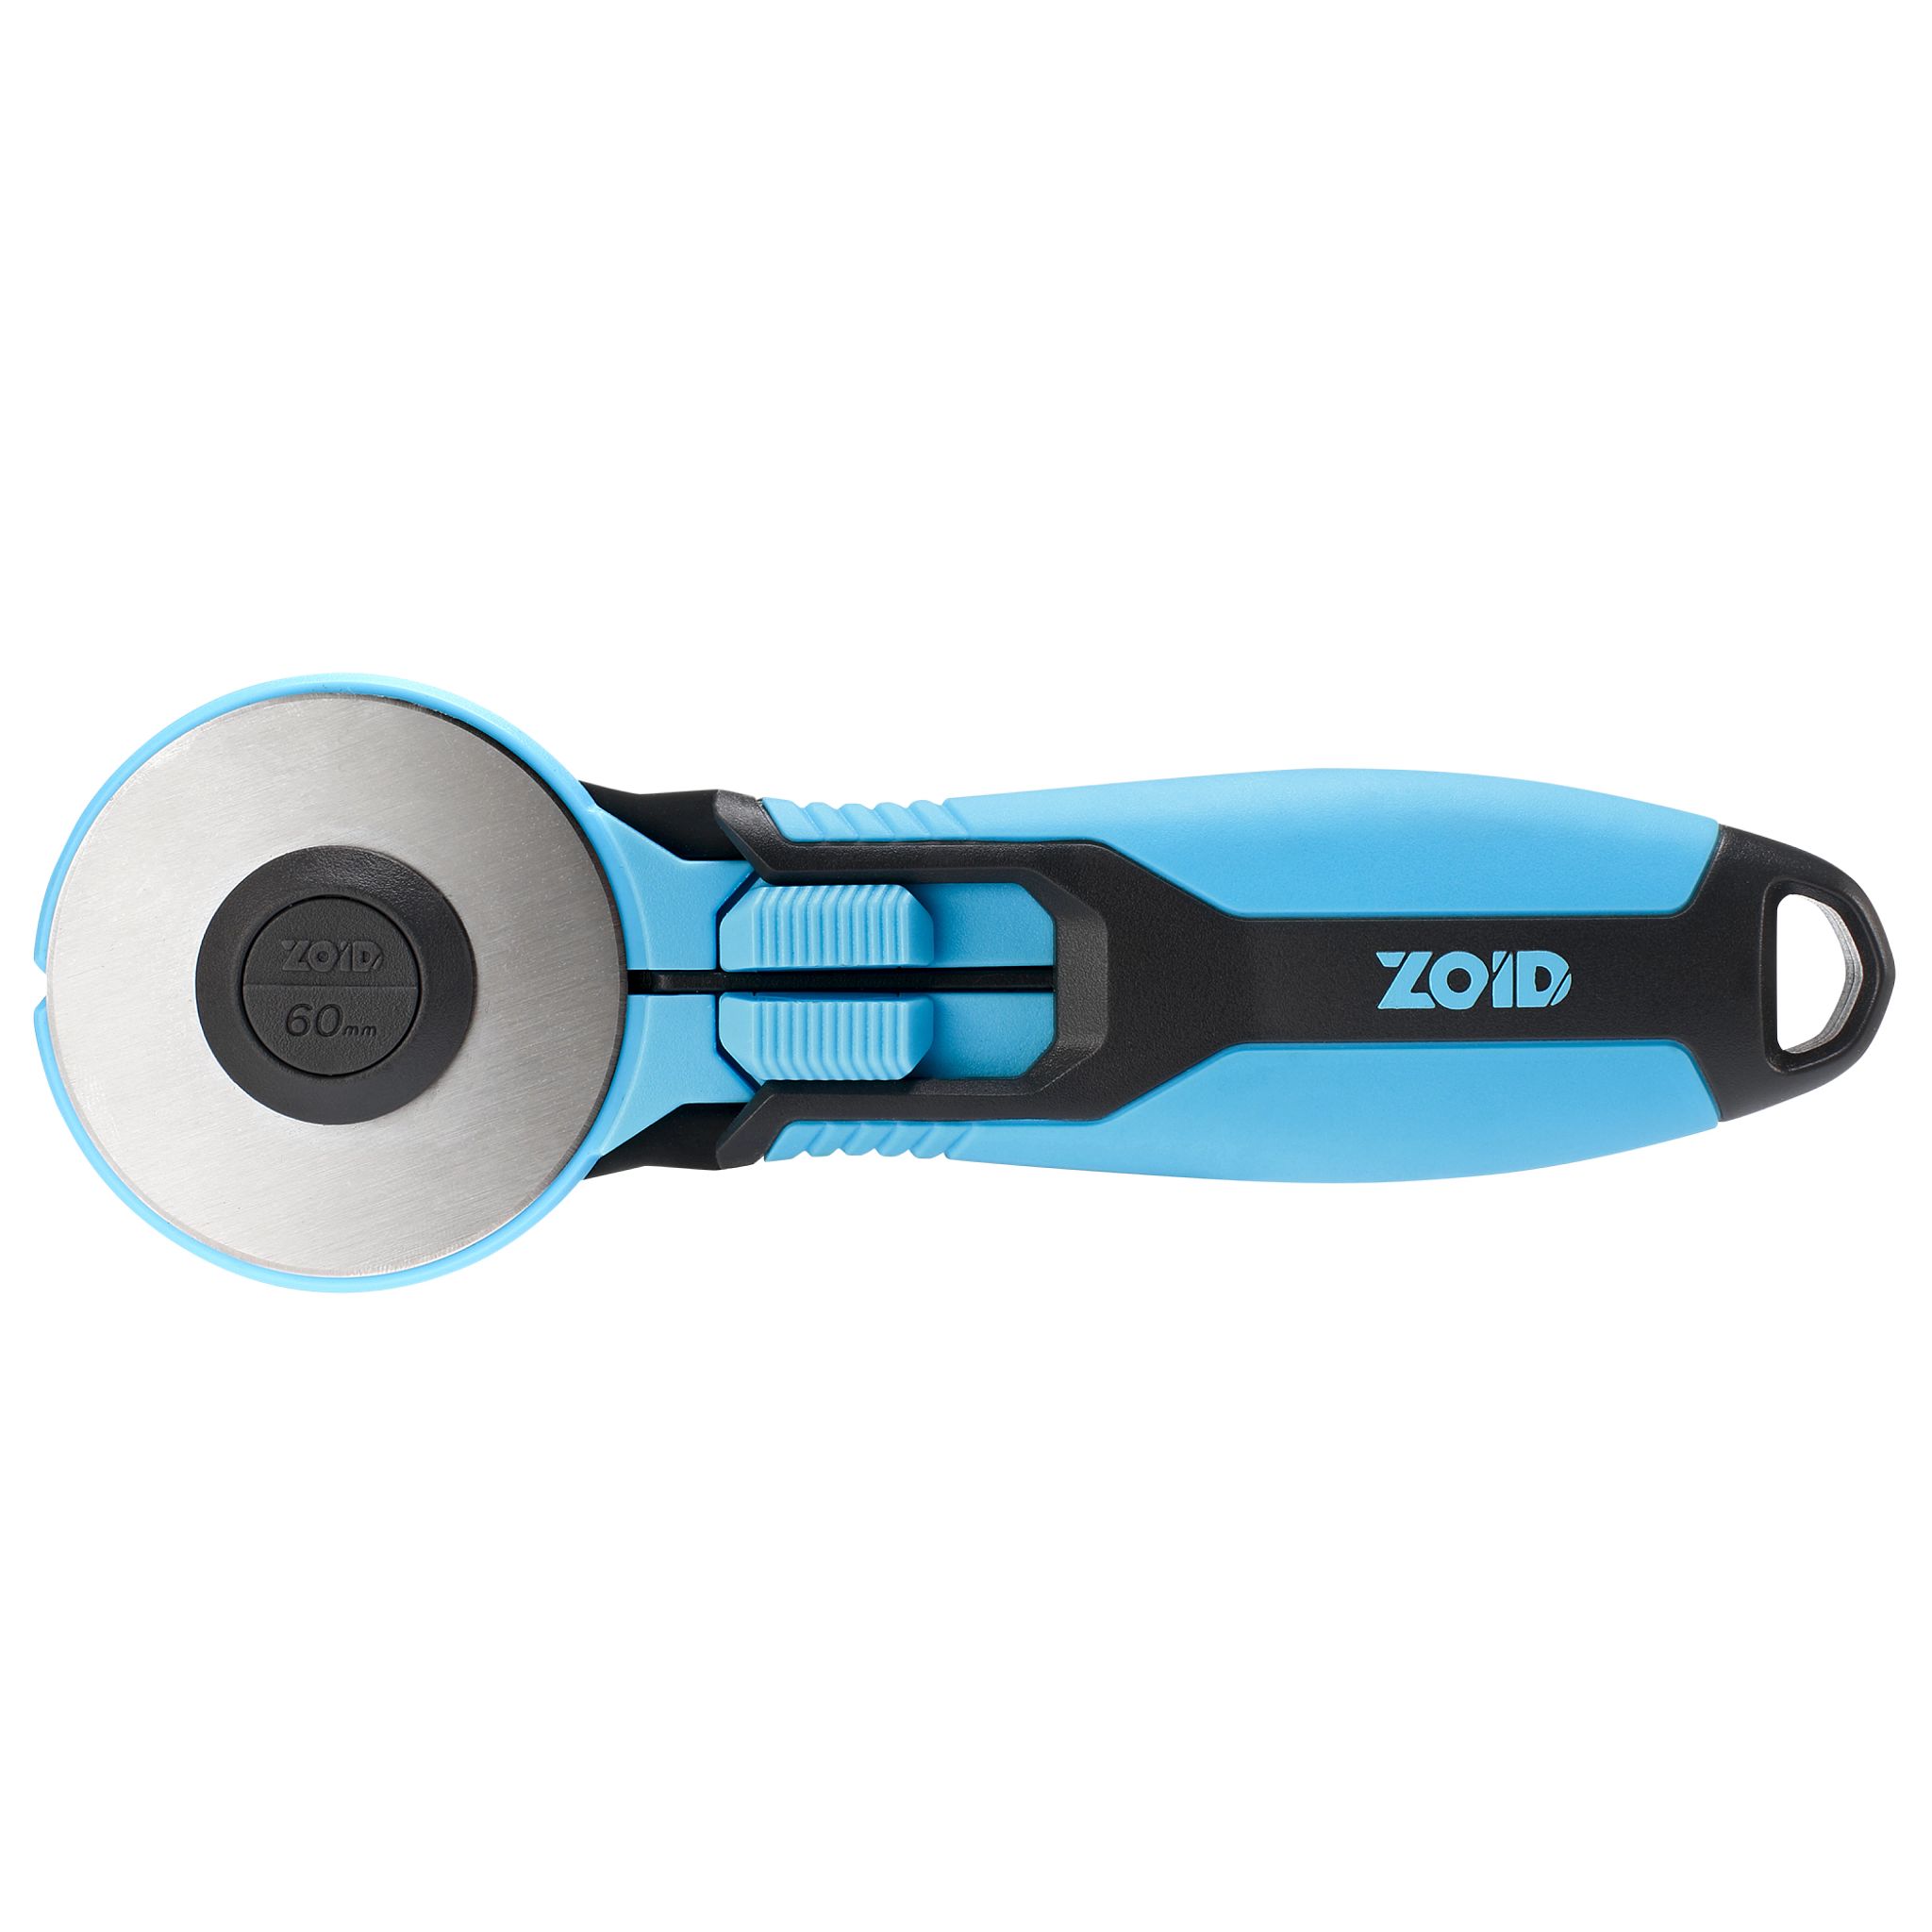 ZOID Tools 60mm Heavy Duty Rotary Cutter with Soft-Touch Handle and Dual  Blade Guard 